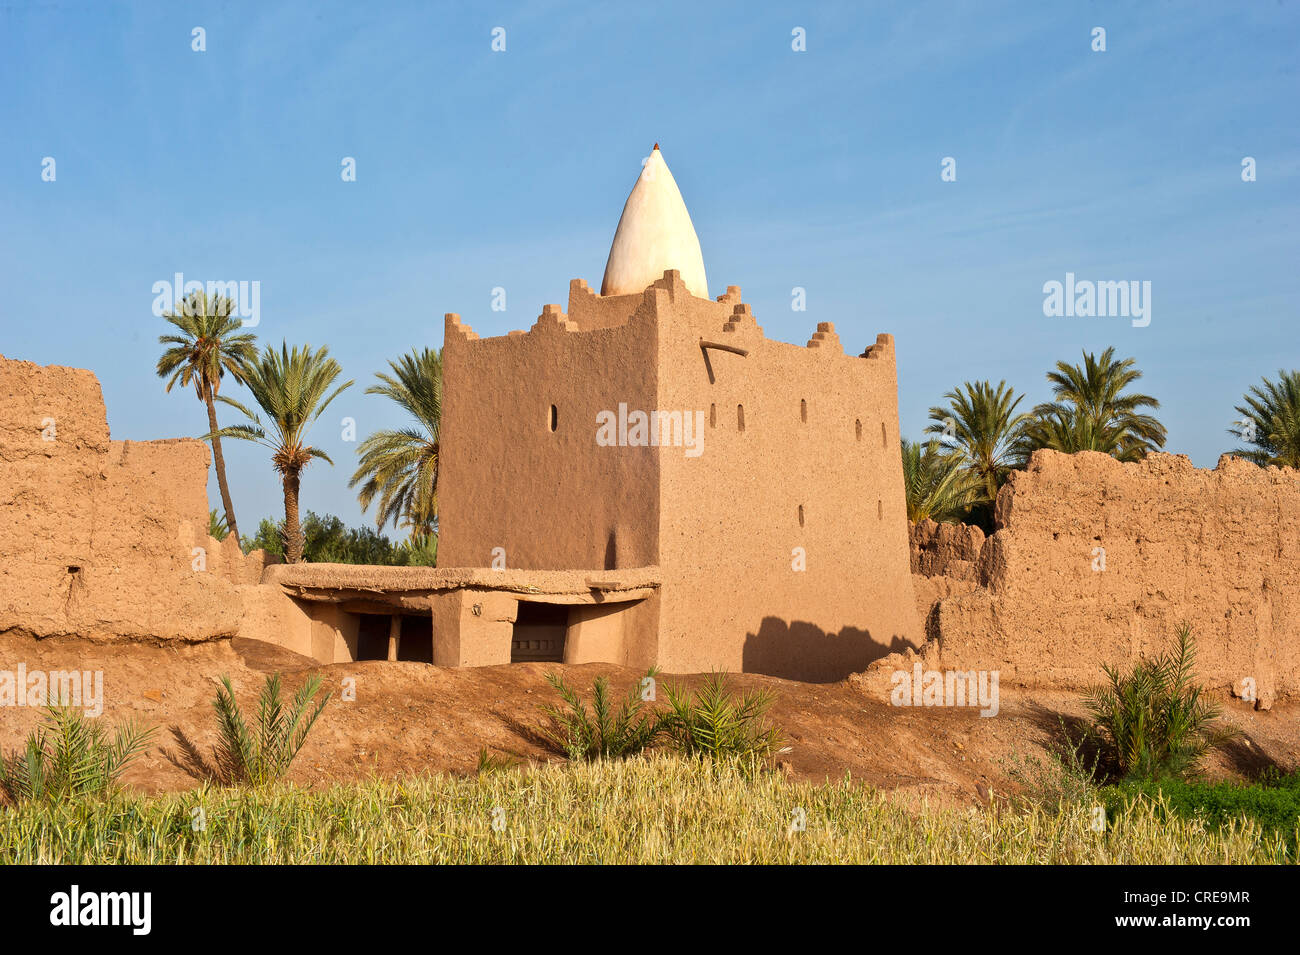 Marabout or tomb of an Islamic saint, and crumbling adobe houses in a palm grove near Skoura, Lower Dades Valley, Kasbahs Route Stock Photo